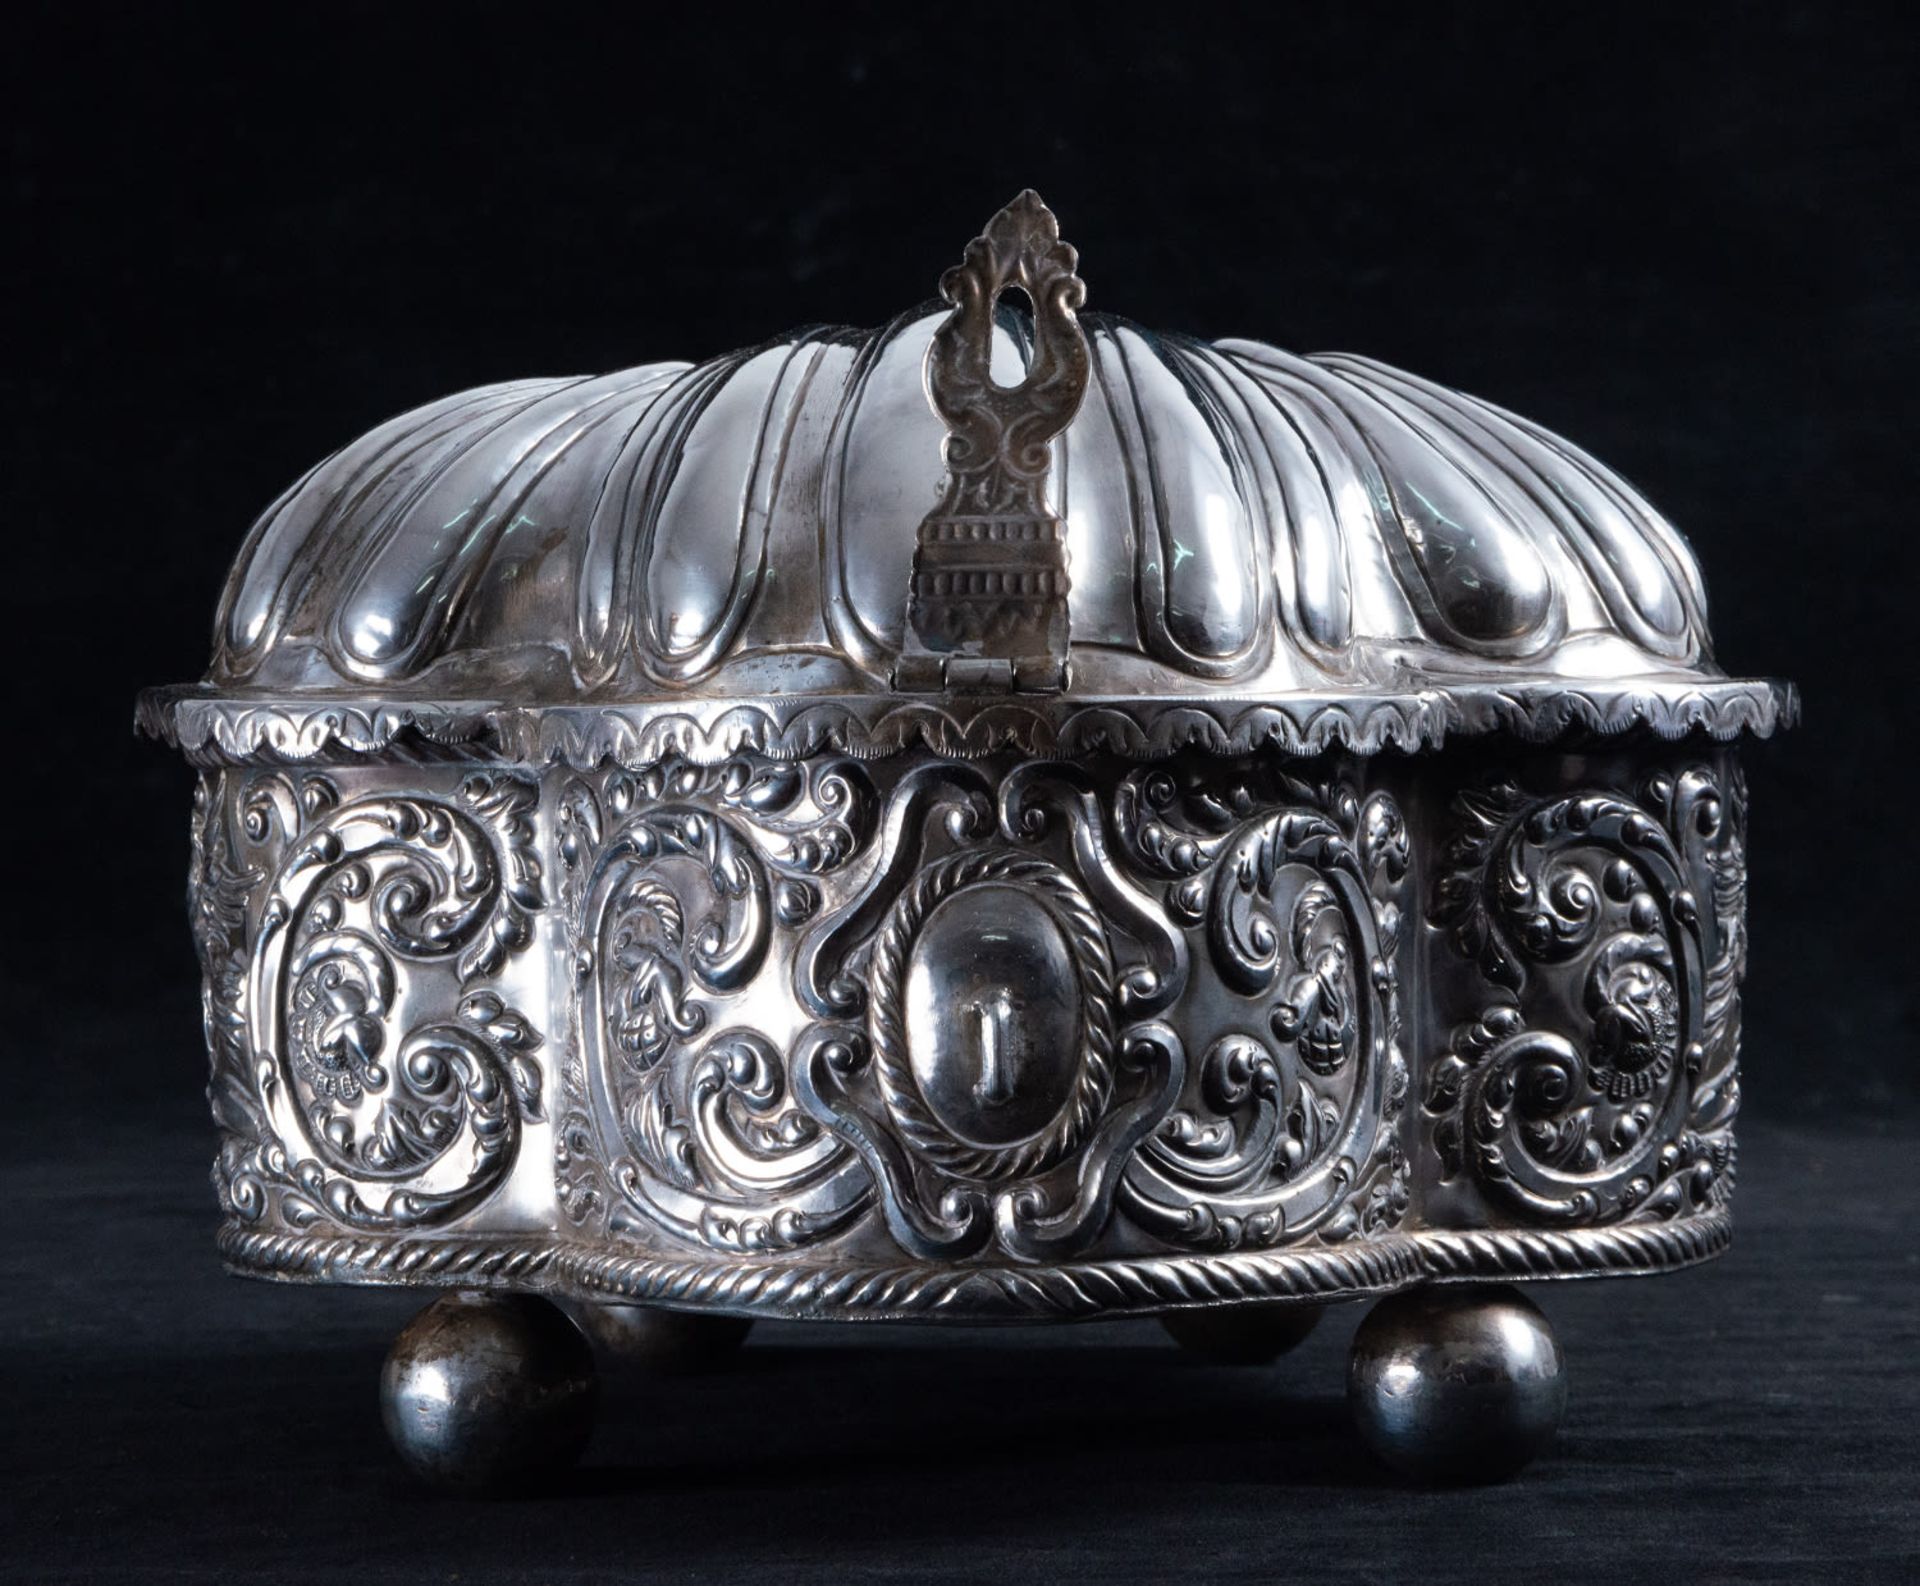 Exceptional Coquera in silver, colonial work, Cuzco, Peru, 18th century - Image 3 of 8